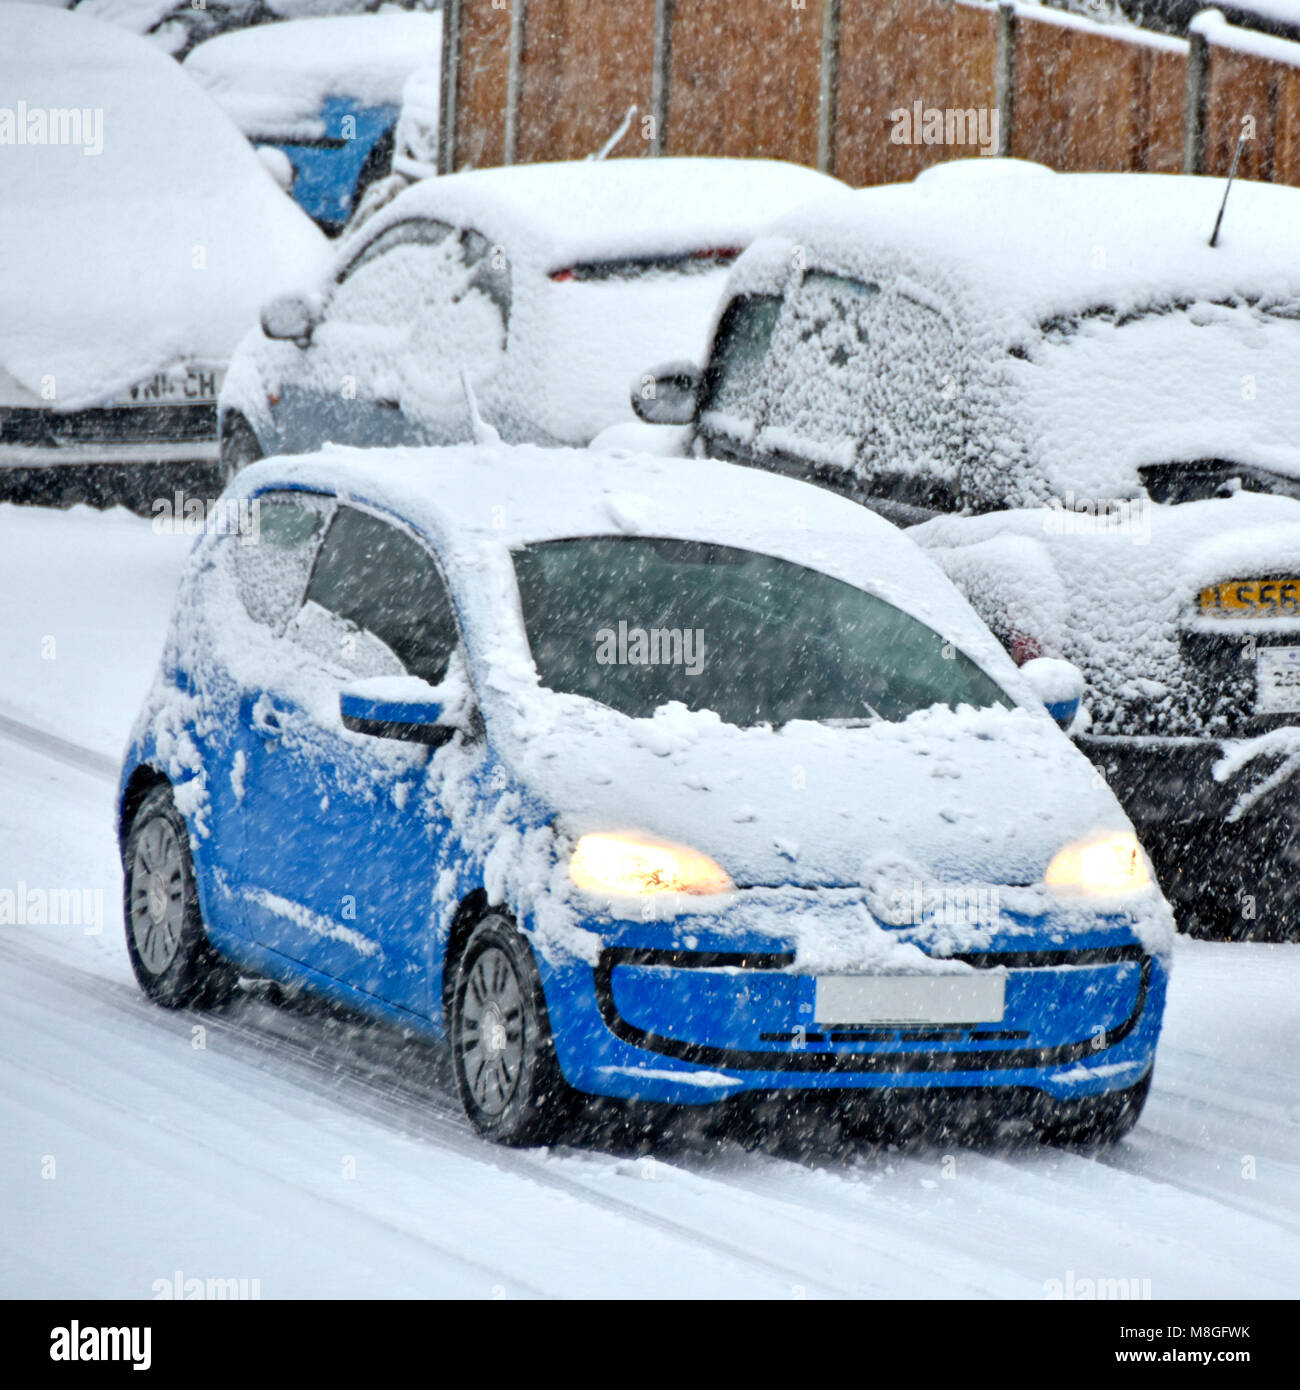 Travel scene blue car covered in snow headlights on driving in bad winter weather with more snowfall on snowy covered road Brentwood Essex England UK Stock Photo